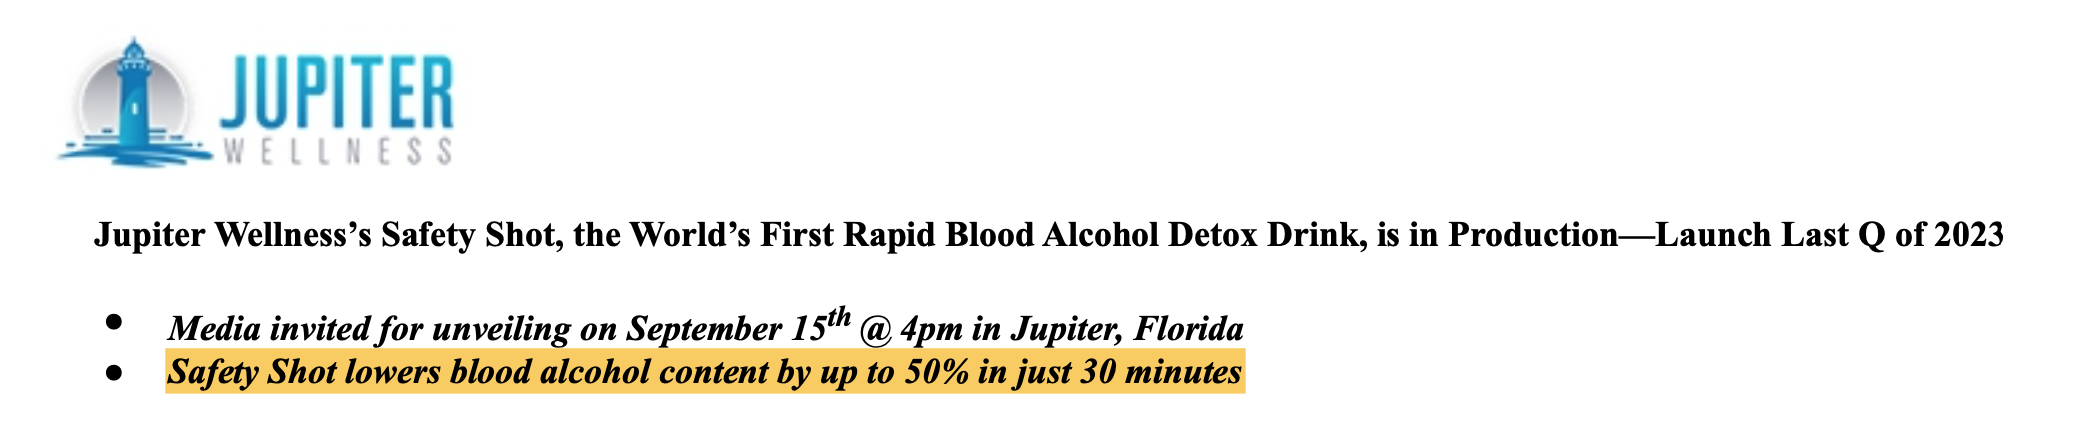 Safety Shot lowers blood alcohol content by up to 50% in just 30 minutes